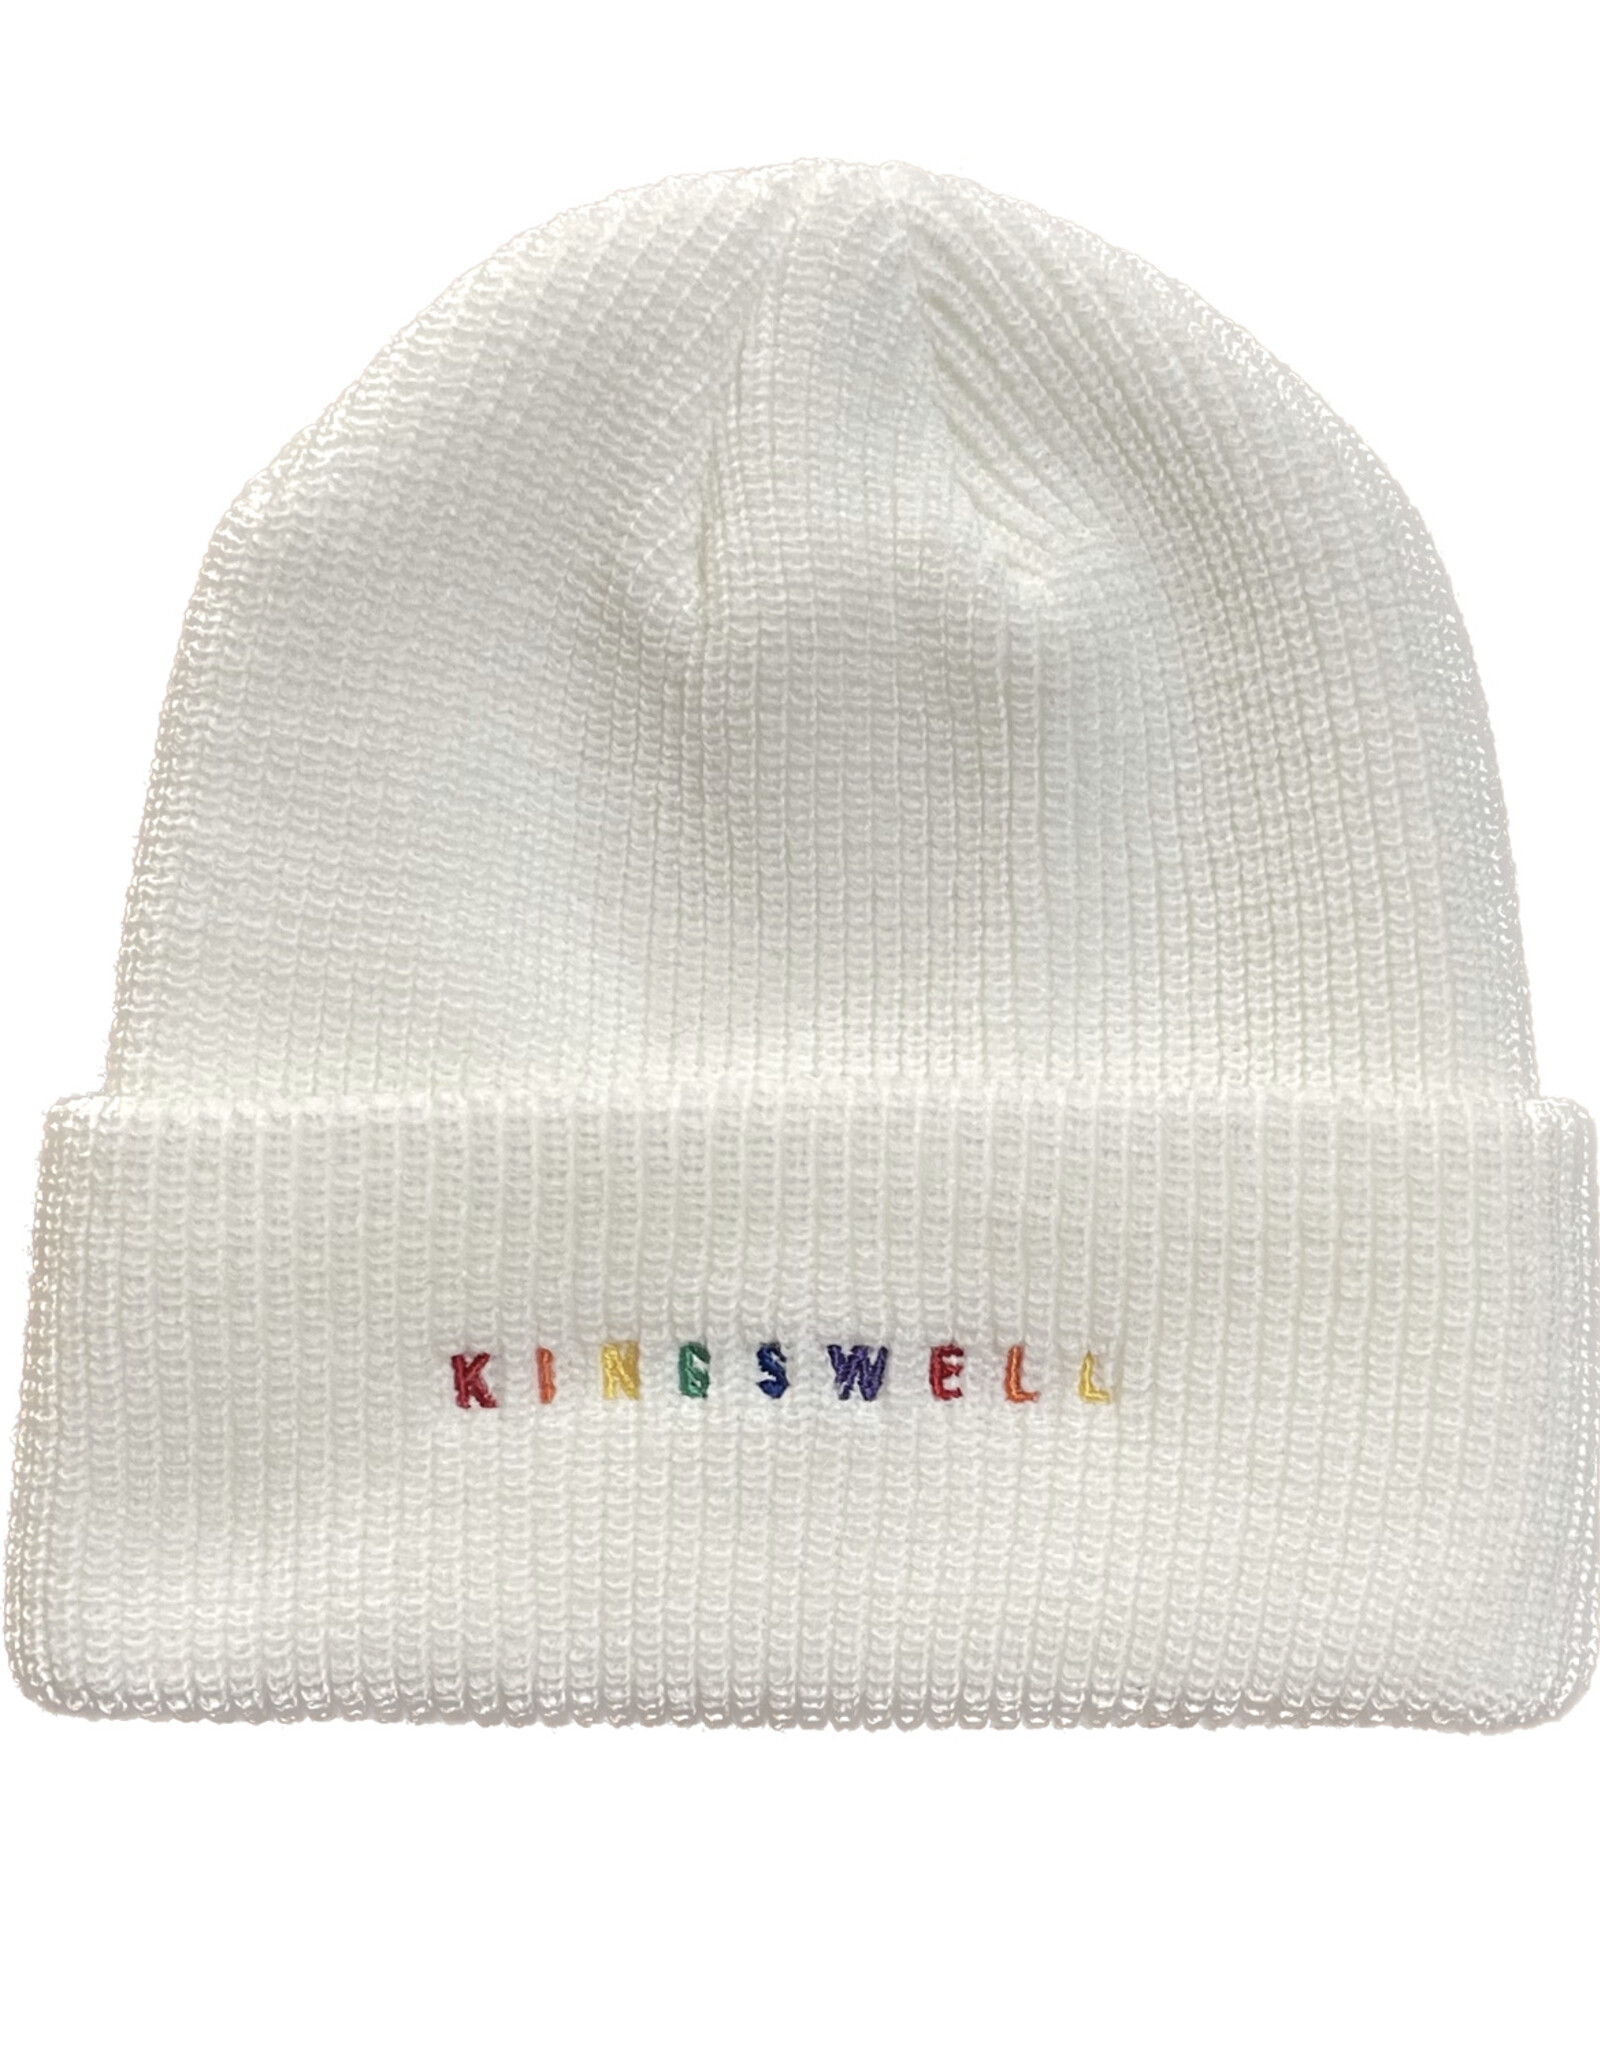 KINGSWELL KINGSWELL EMBROIDERED BEANIE - RAINBOW